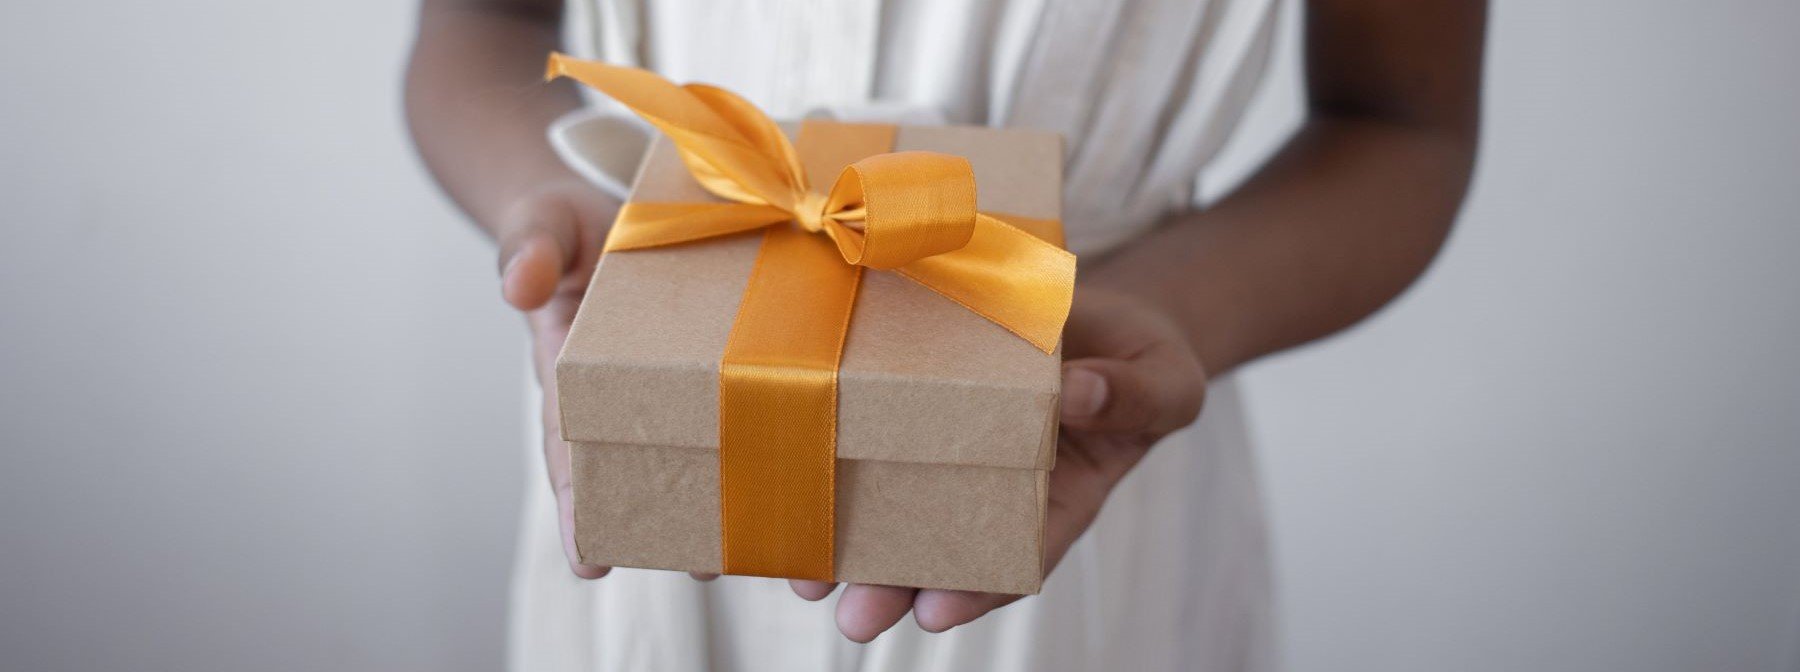 How to Give a Beauty Gift: The Rules